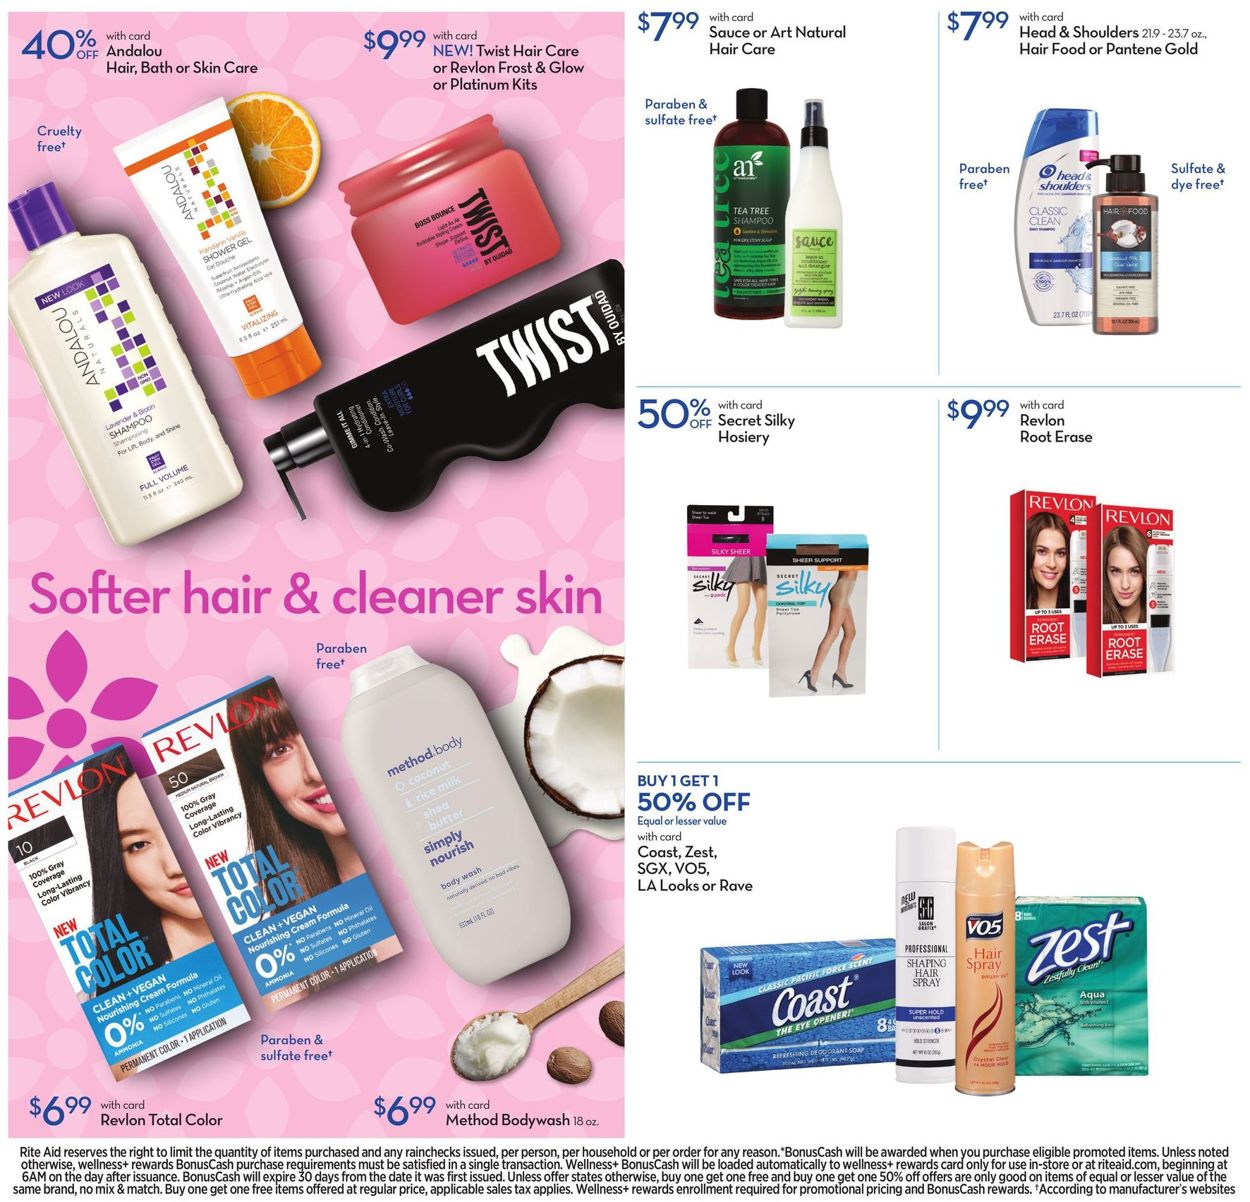 Catalogue Rite Aid from 07/04/2021